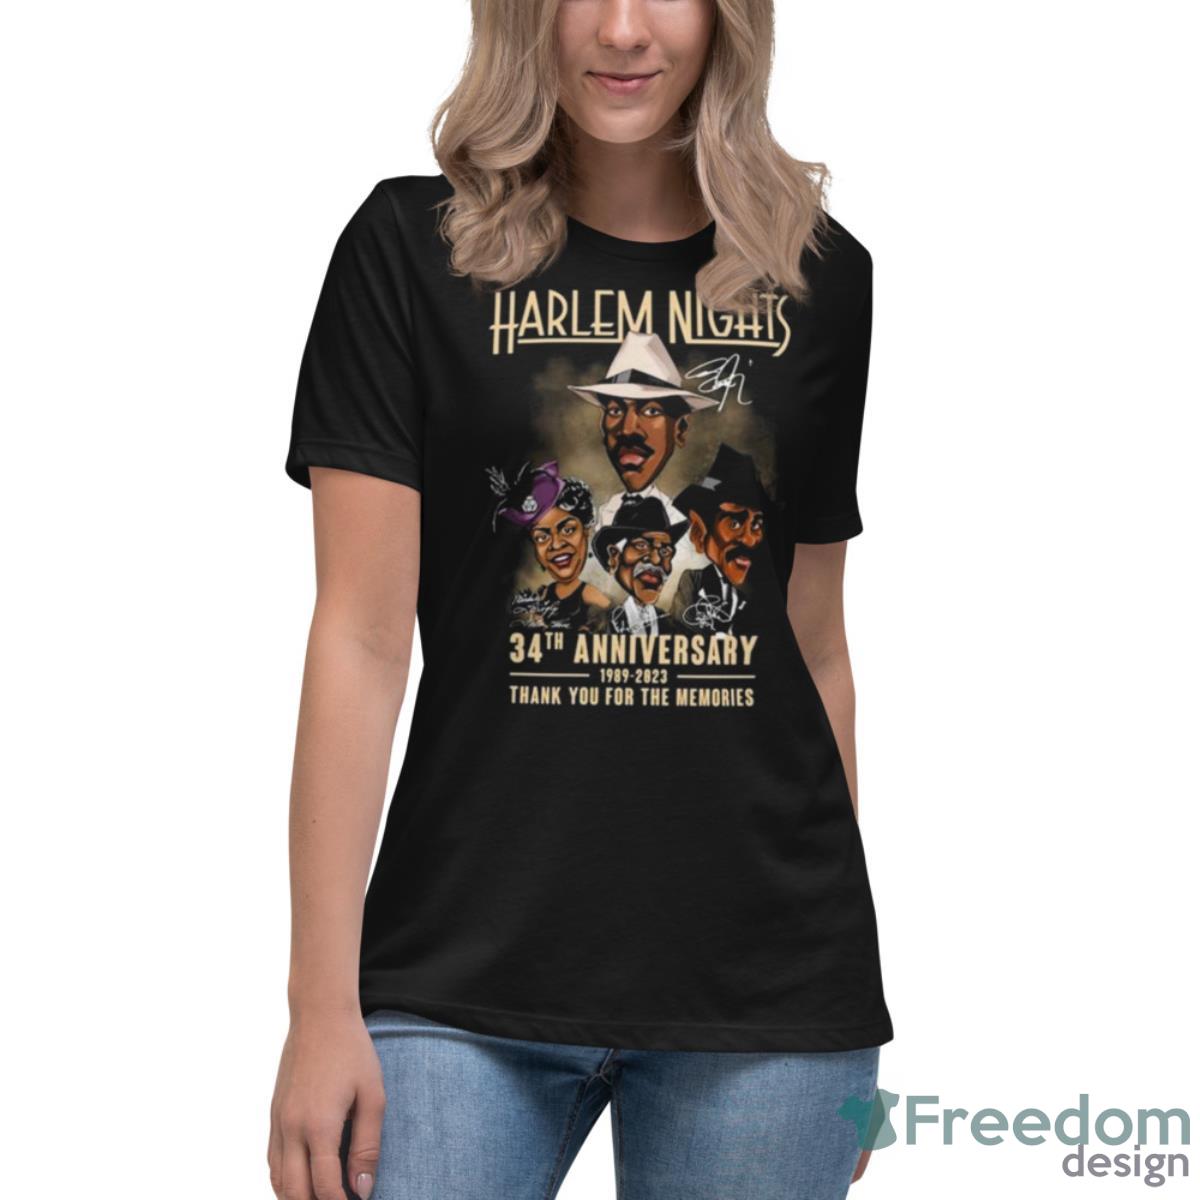 Harlem Nights 34th Anniversary 1989 – 2023 Thank You For The Memories Signatures Shirt